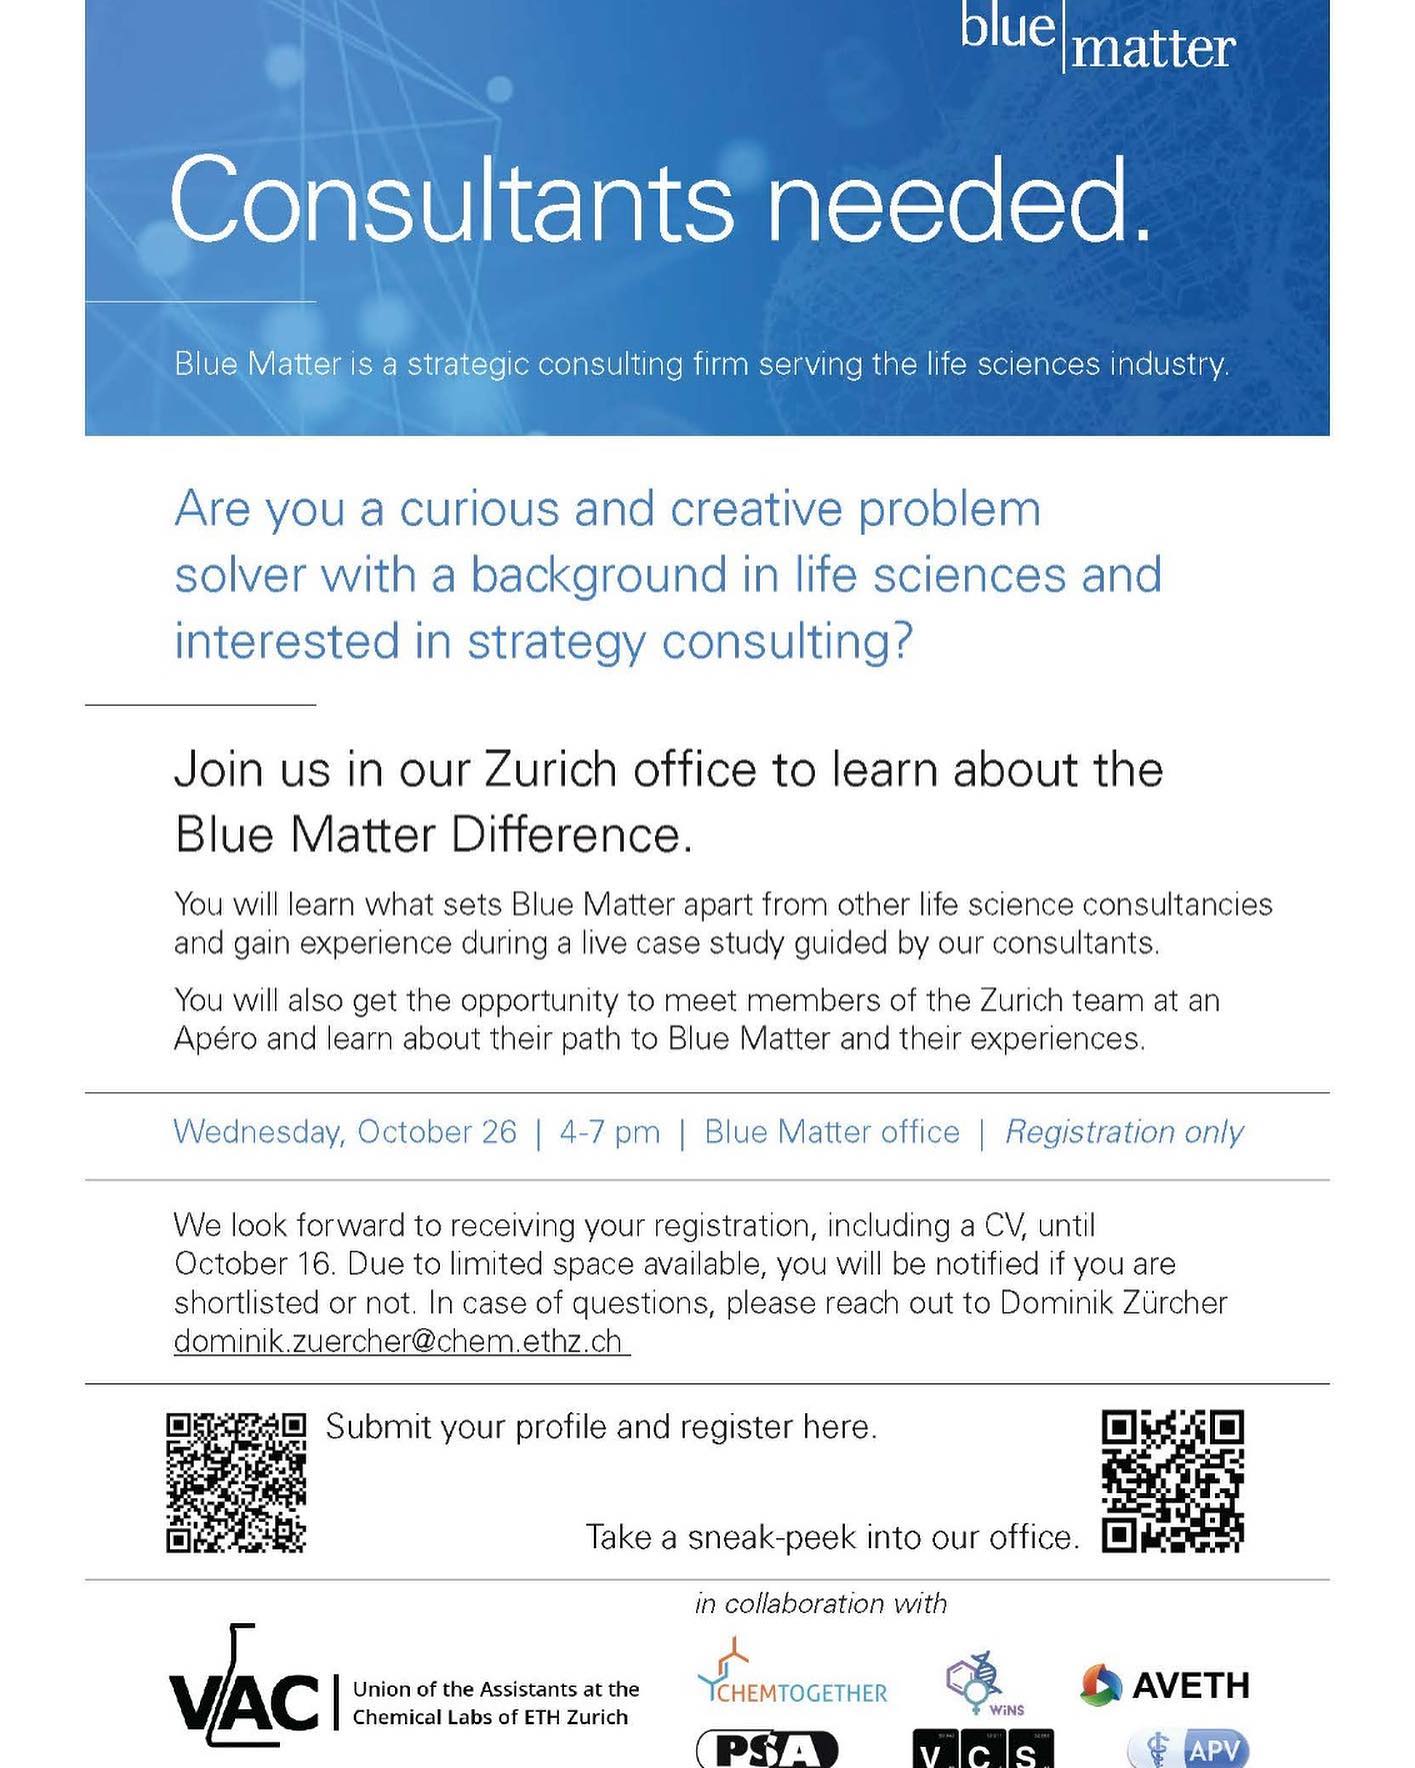 Are you interested in Lifescience strategy consulting ? ➡️ Then it is for you 

🏢Join Blue Matter’s office in Zurich to know more about it. Wednesday 26th October 2022. 

⁉️Please reach out to Dominik.zuercher@chem.ethz.ch if you have any questions 

Deadline: October 16th 2022 
.
.
#wins #lifescience #career #strategyconsulting #myethzurich #eth #uzh #networking #bluematter #consulting